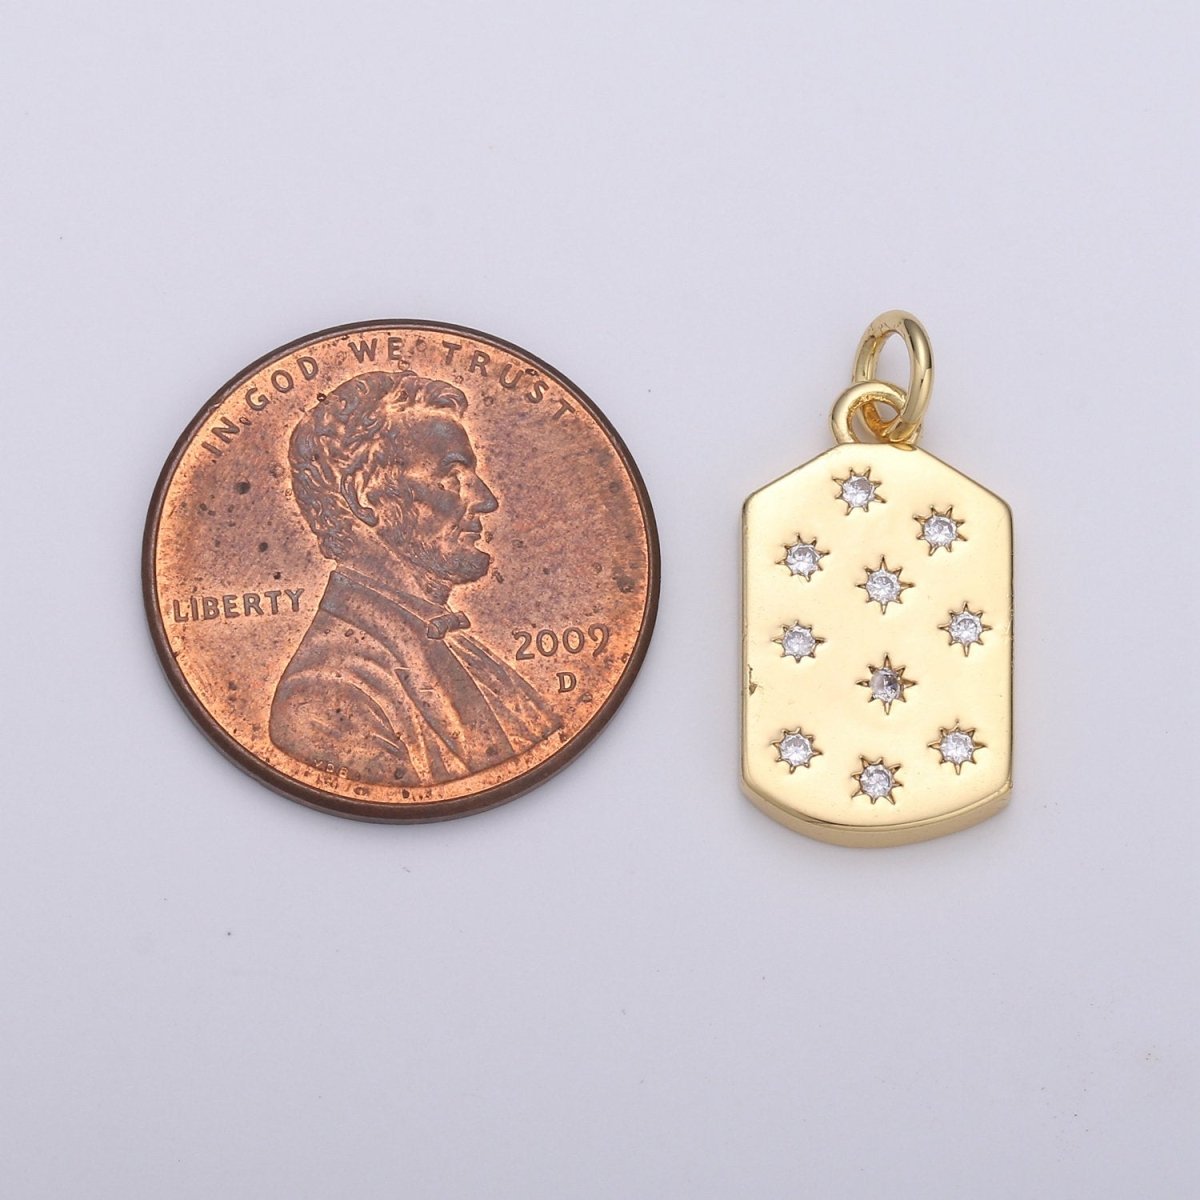 Micro Pave Star Pendant Dainty Star Charm Gold Celestial Dog Tag Charm Military Tag Jewelry Making Supply 24K Gold Filled Findings D-532 - DLUXCA